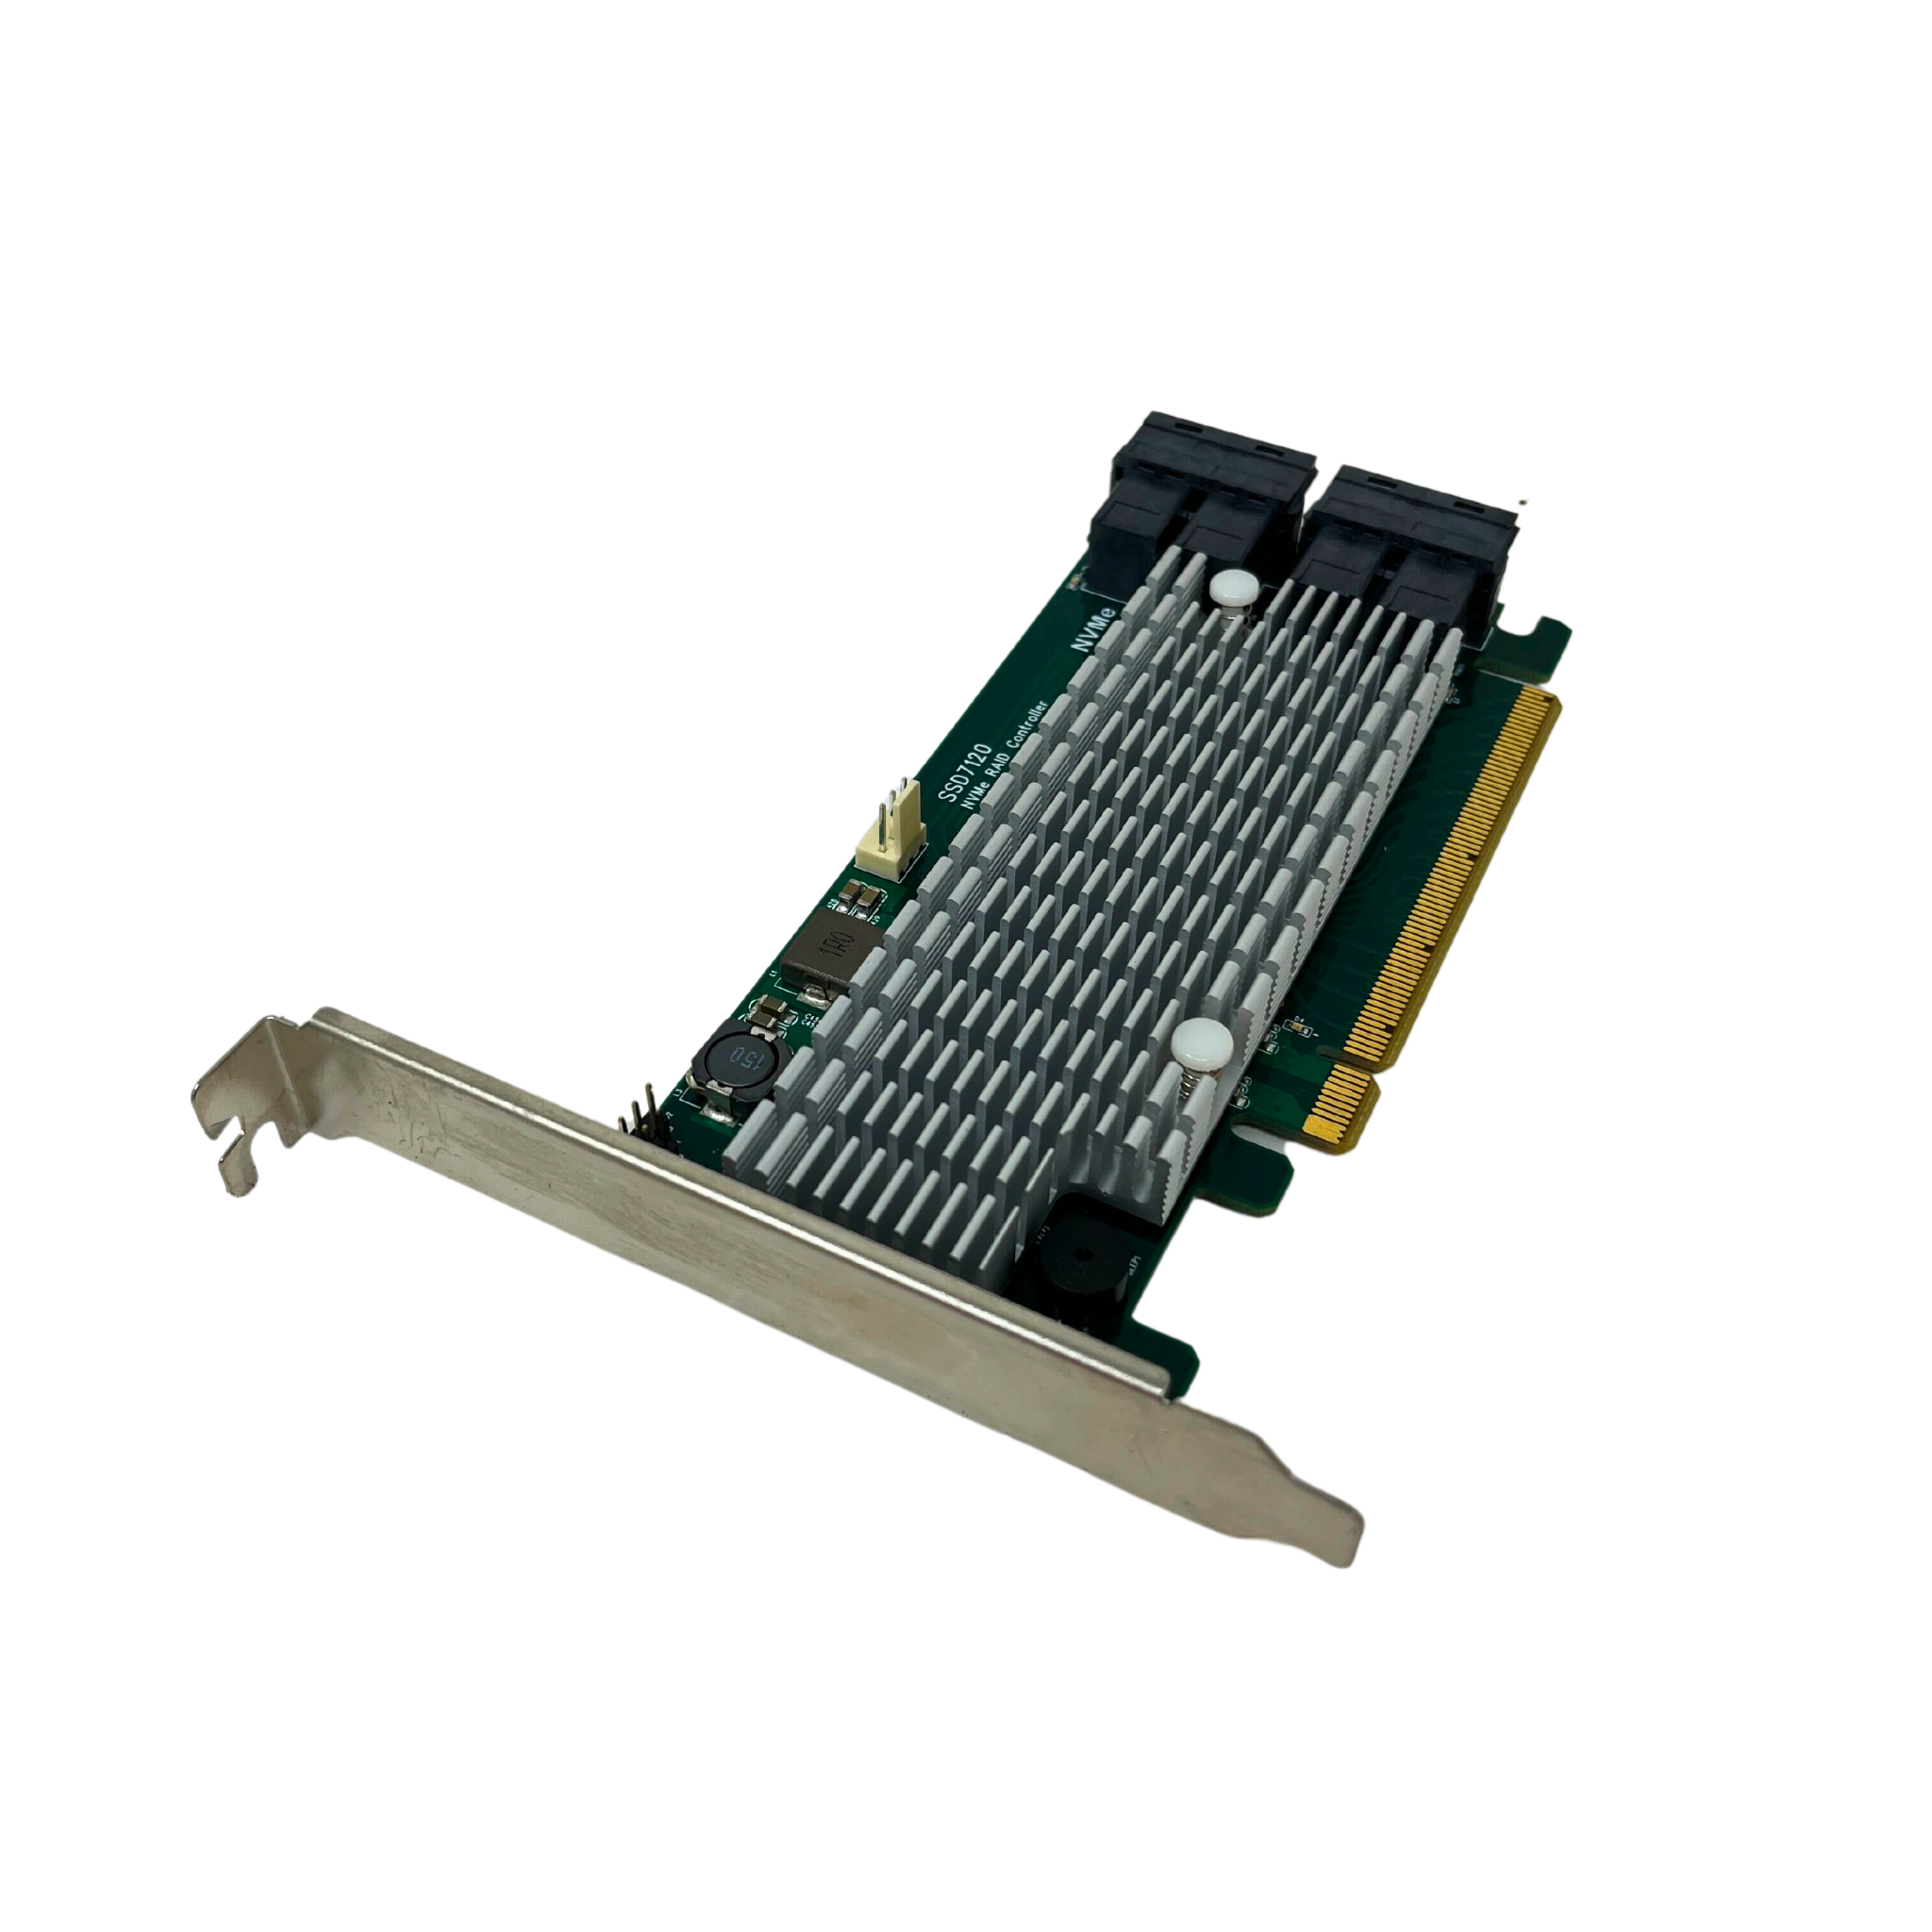 High Point NVMe 4-PORT 32Gbps U.2 Ports to PCIe 3.0 x16 RAID Controller (SSD7120)